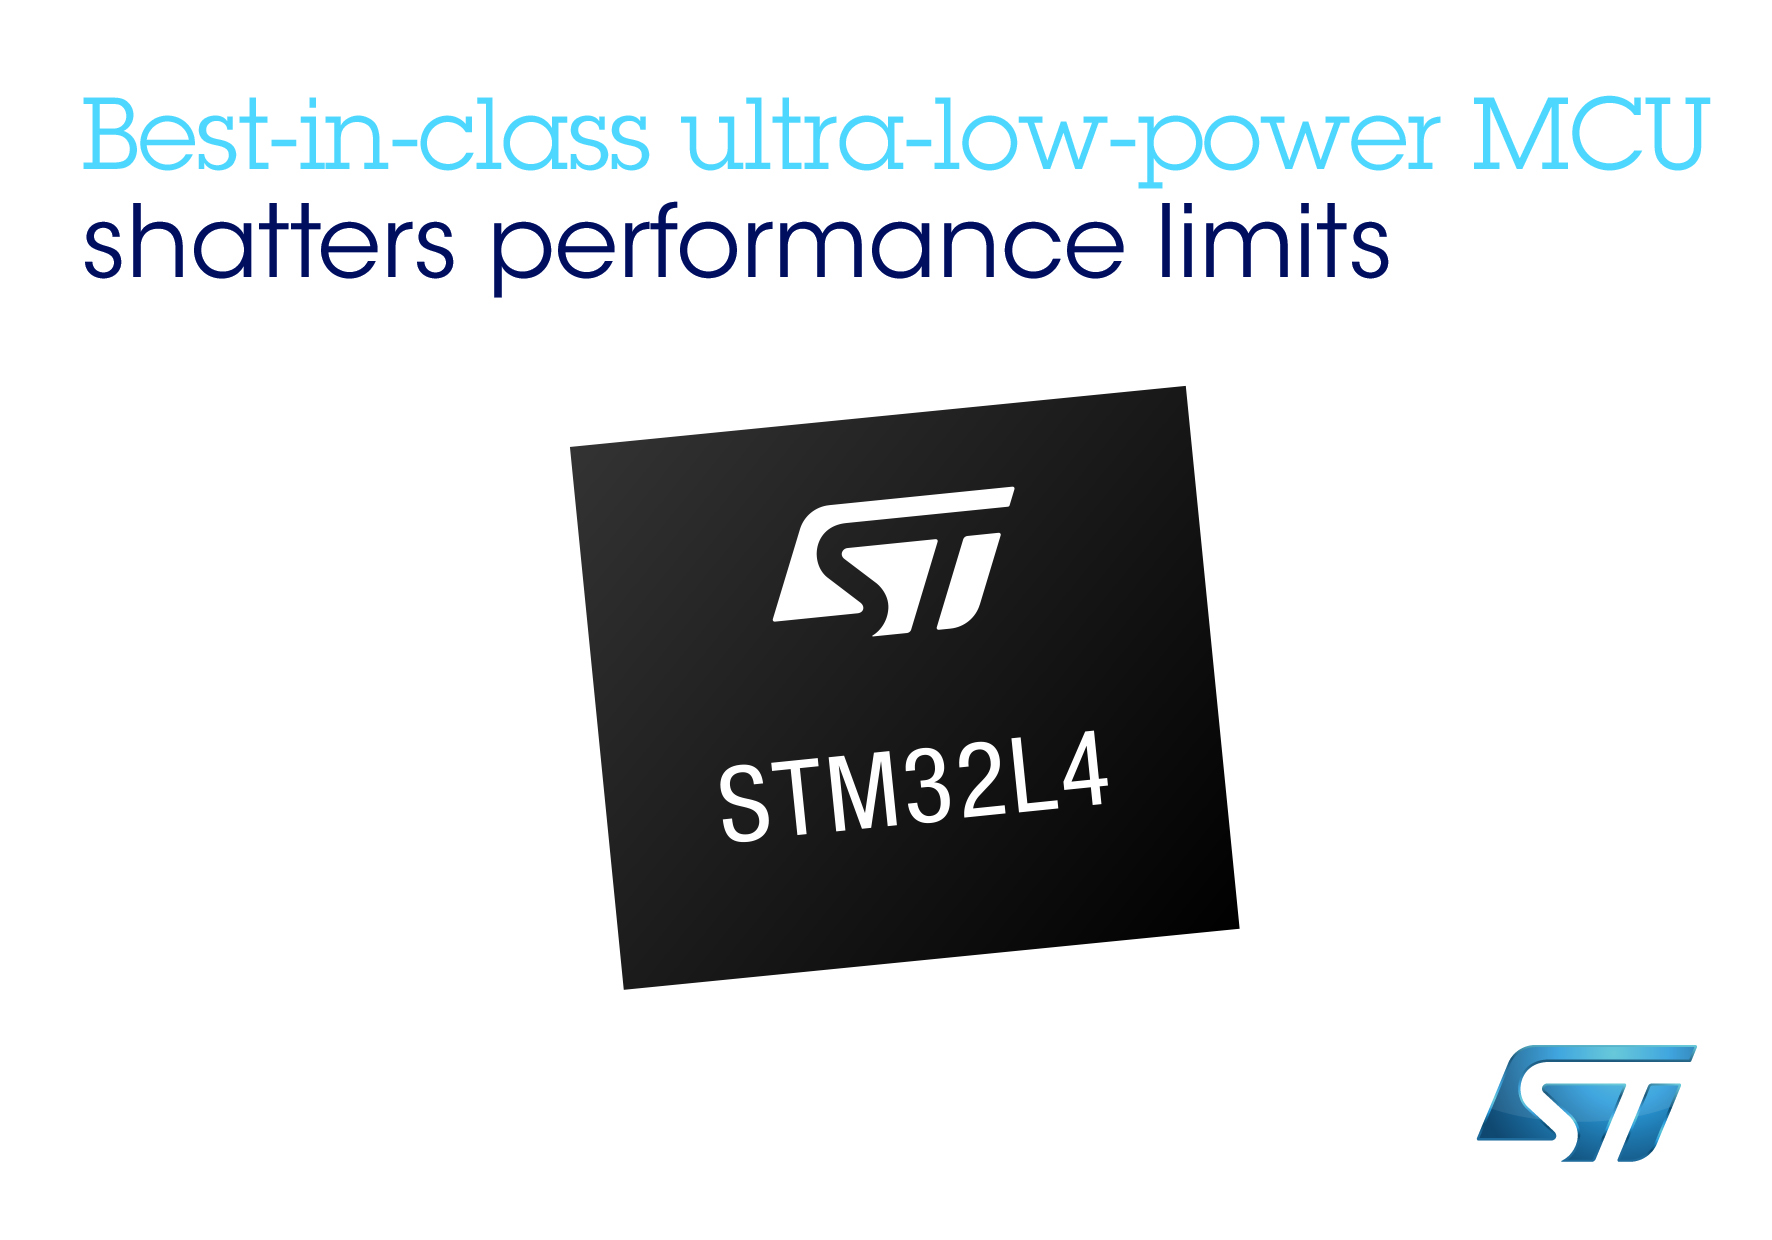 STMicro's STM32L4 microcontrollers overcome performance limitations for ultra-low-power apps